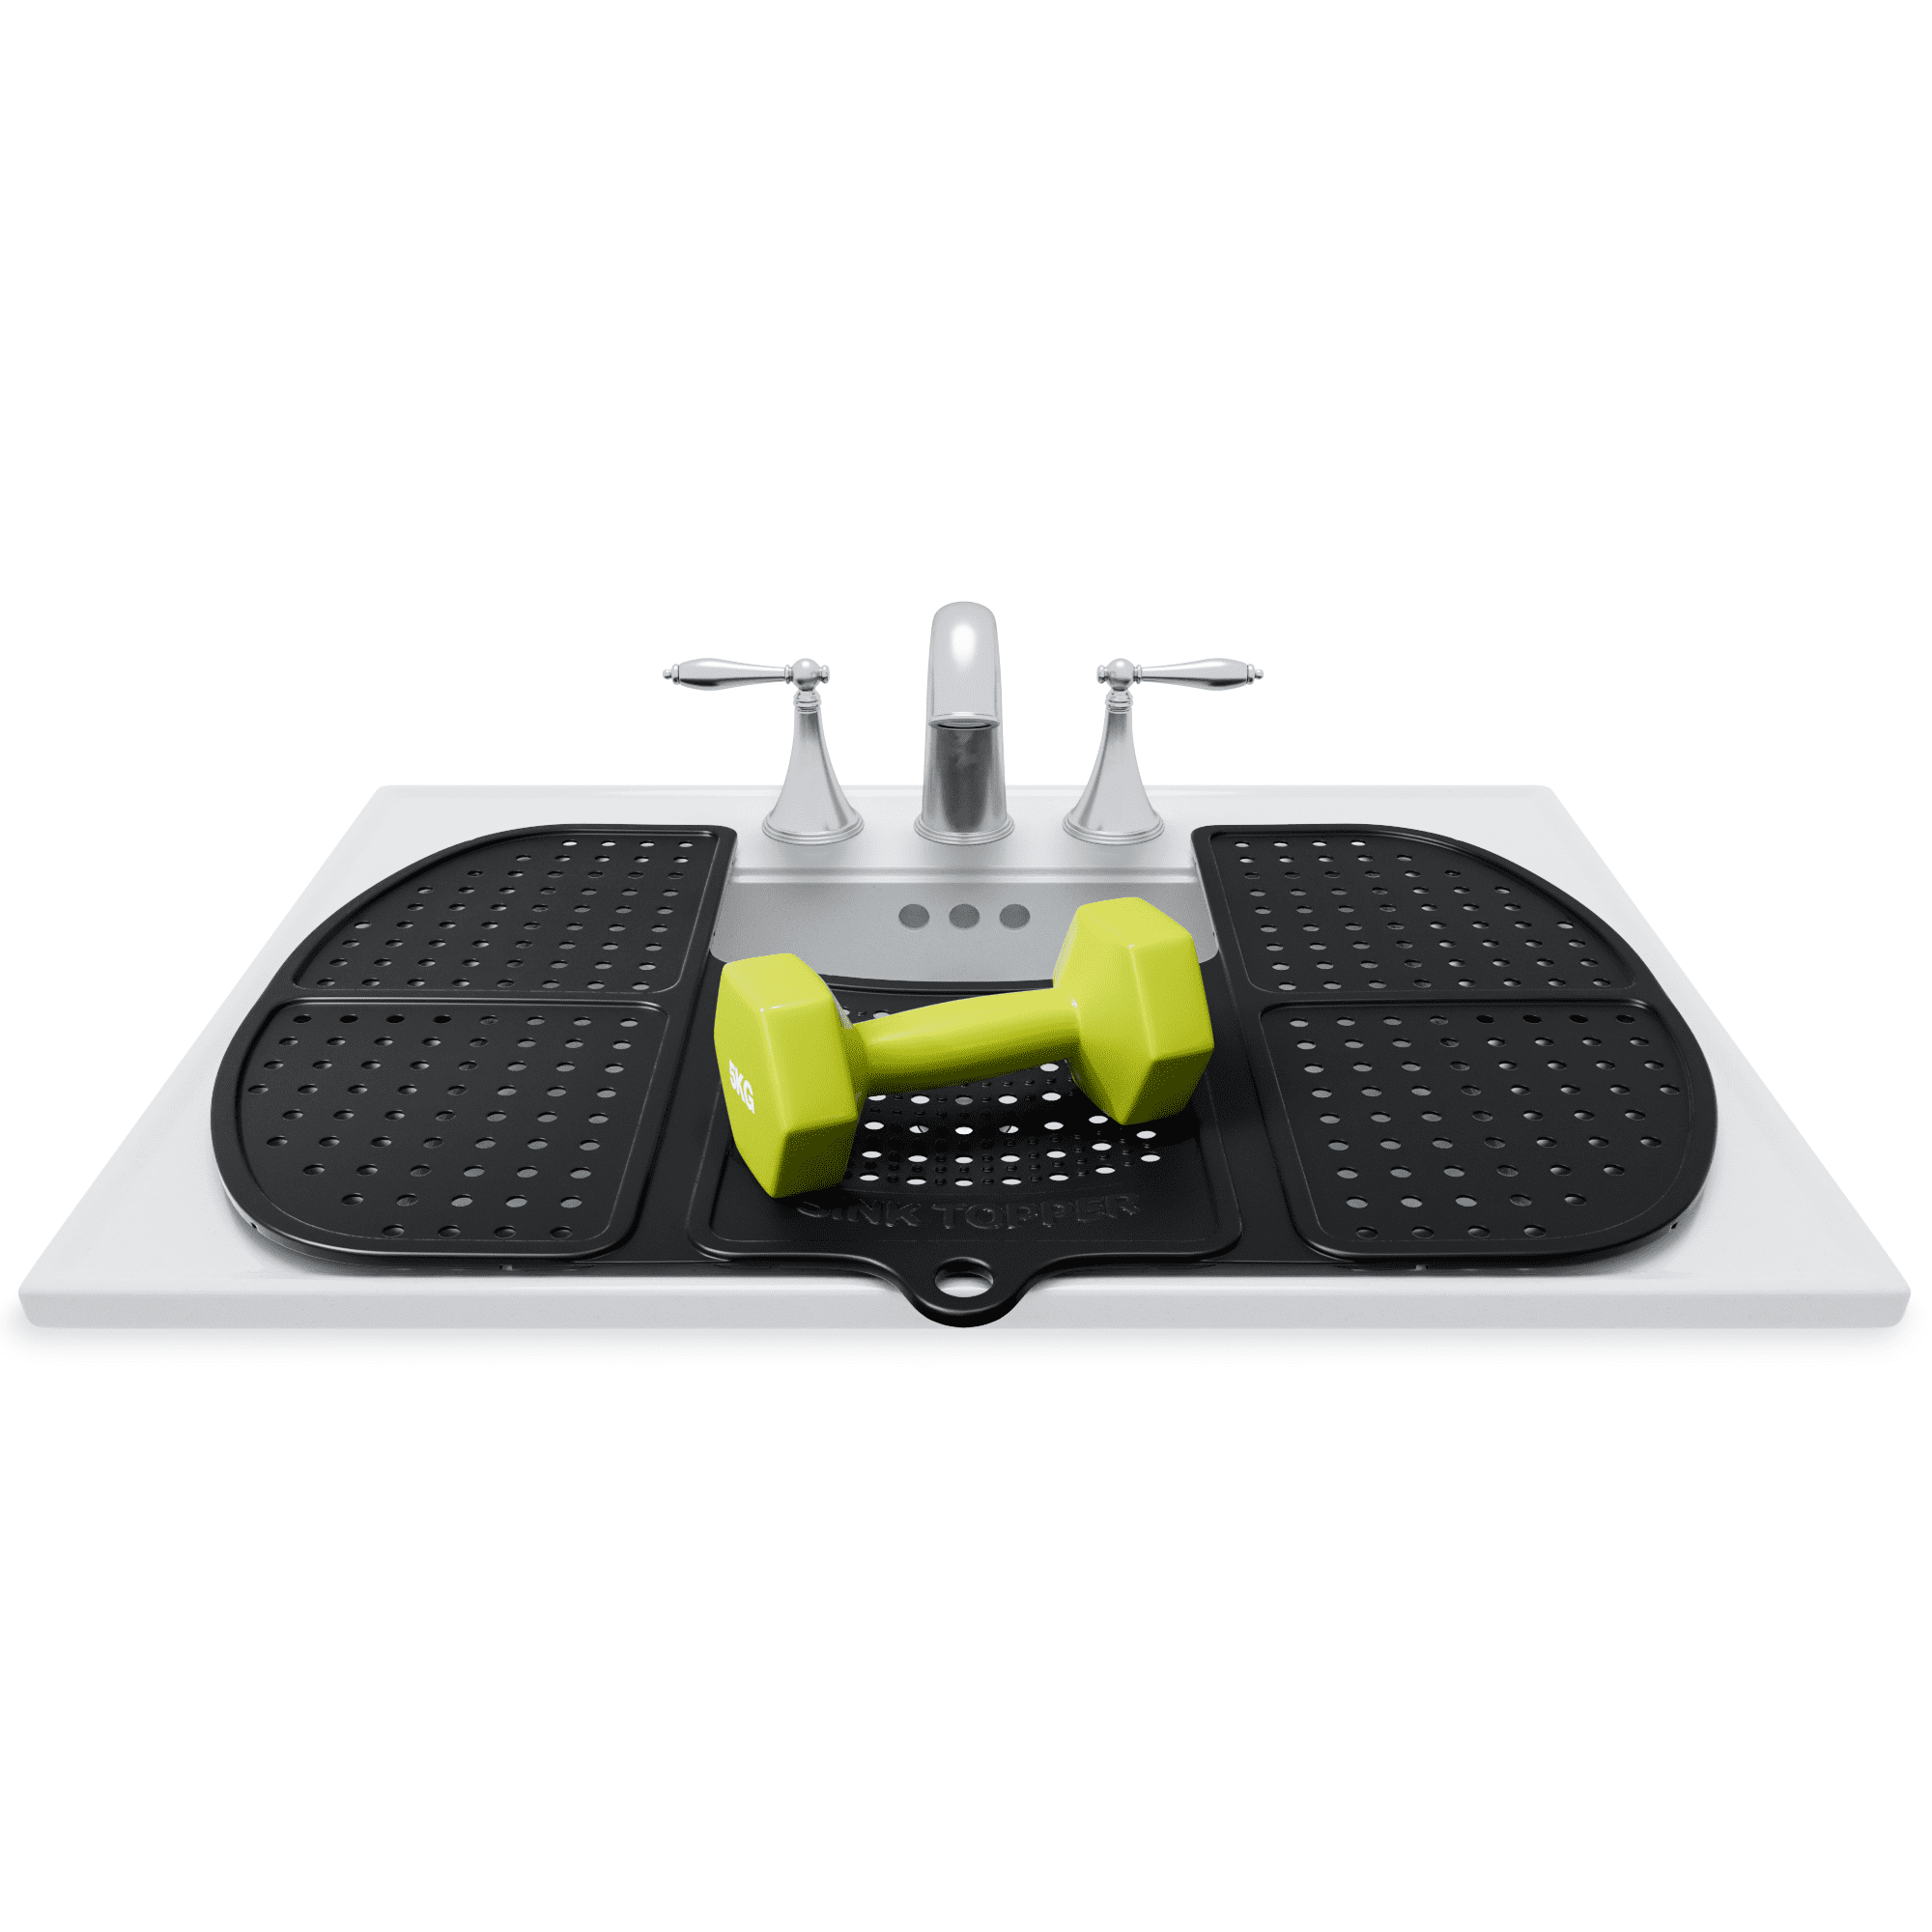 Sink Topper Foldable Sink Cover - … curated on LTK